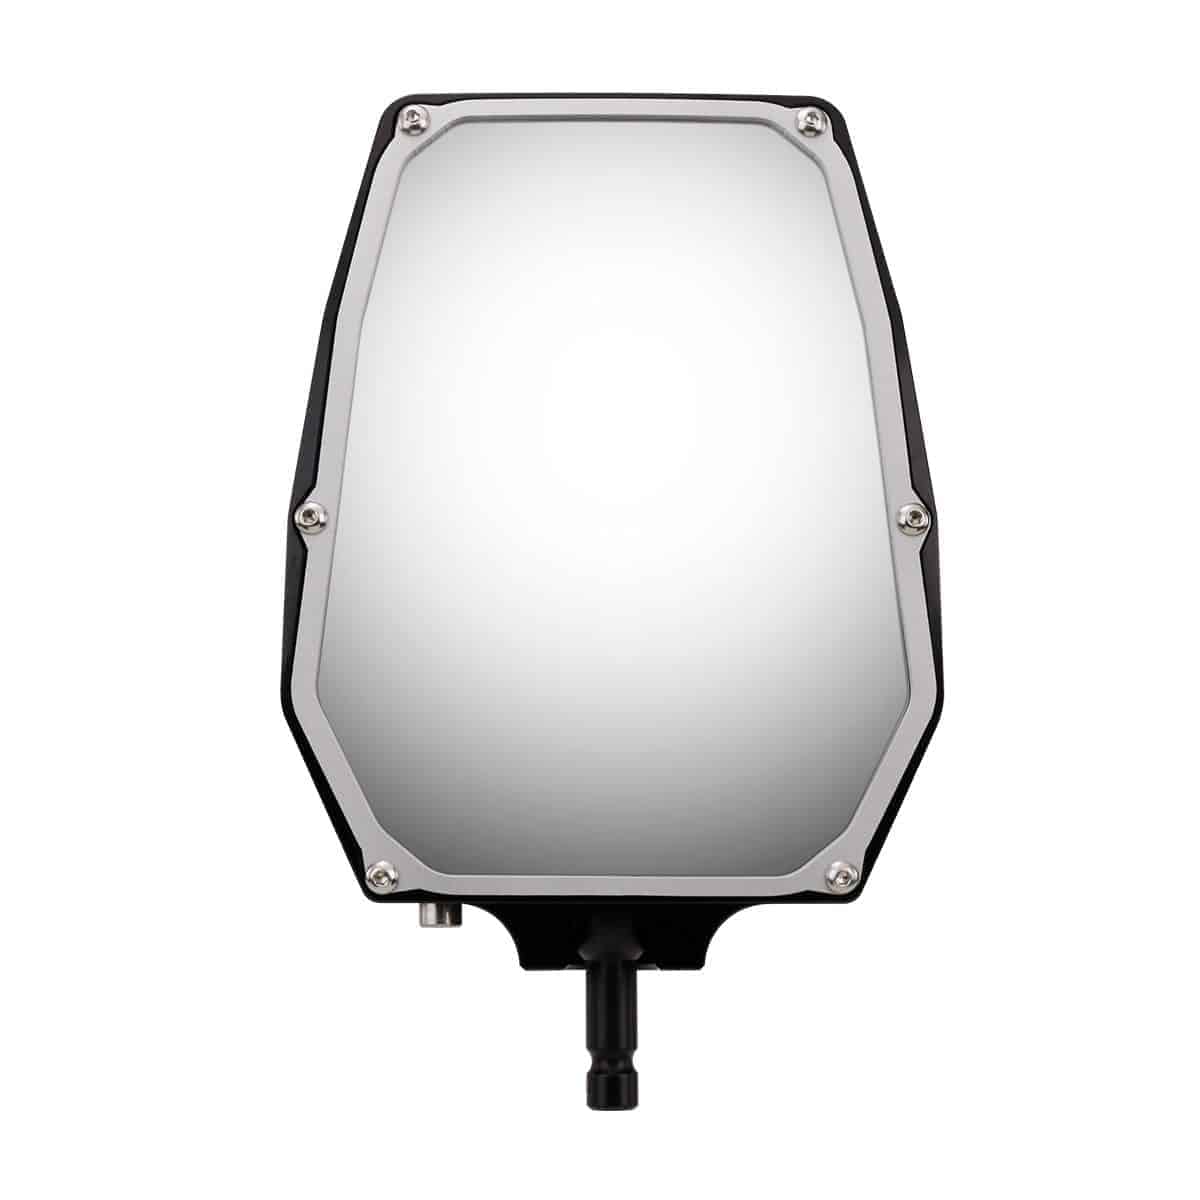 Sector Seven Spectrum Mirrors with 1/2" Spud